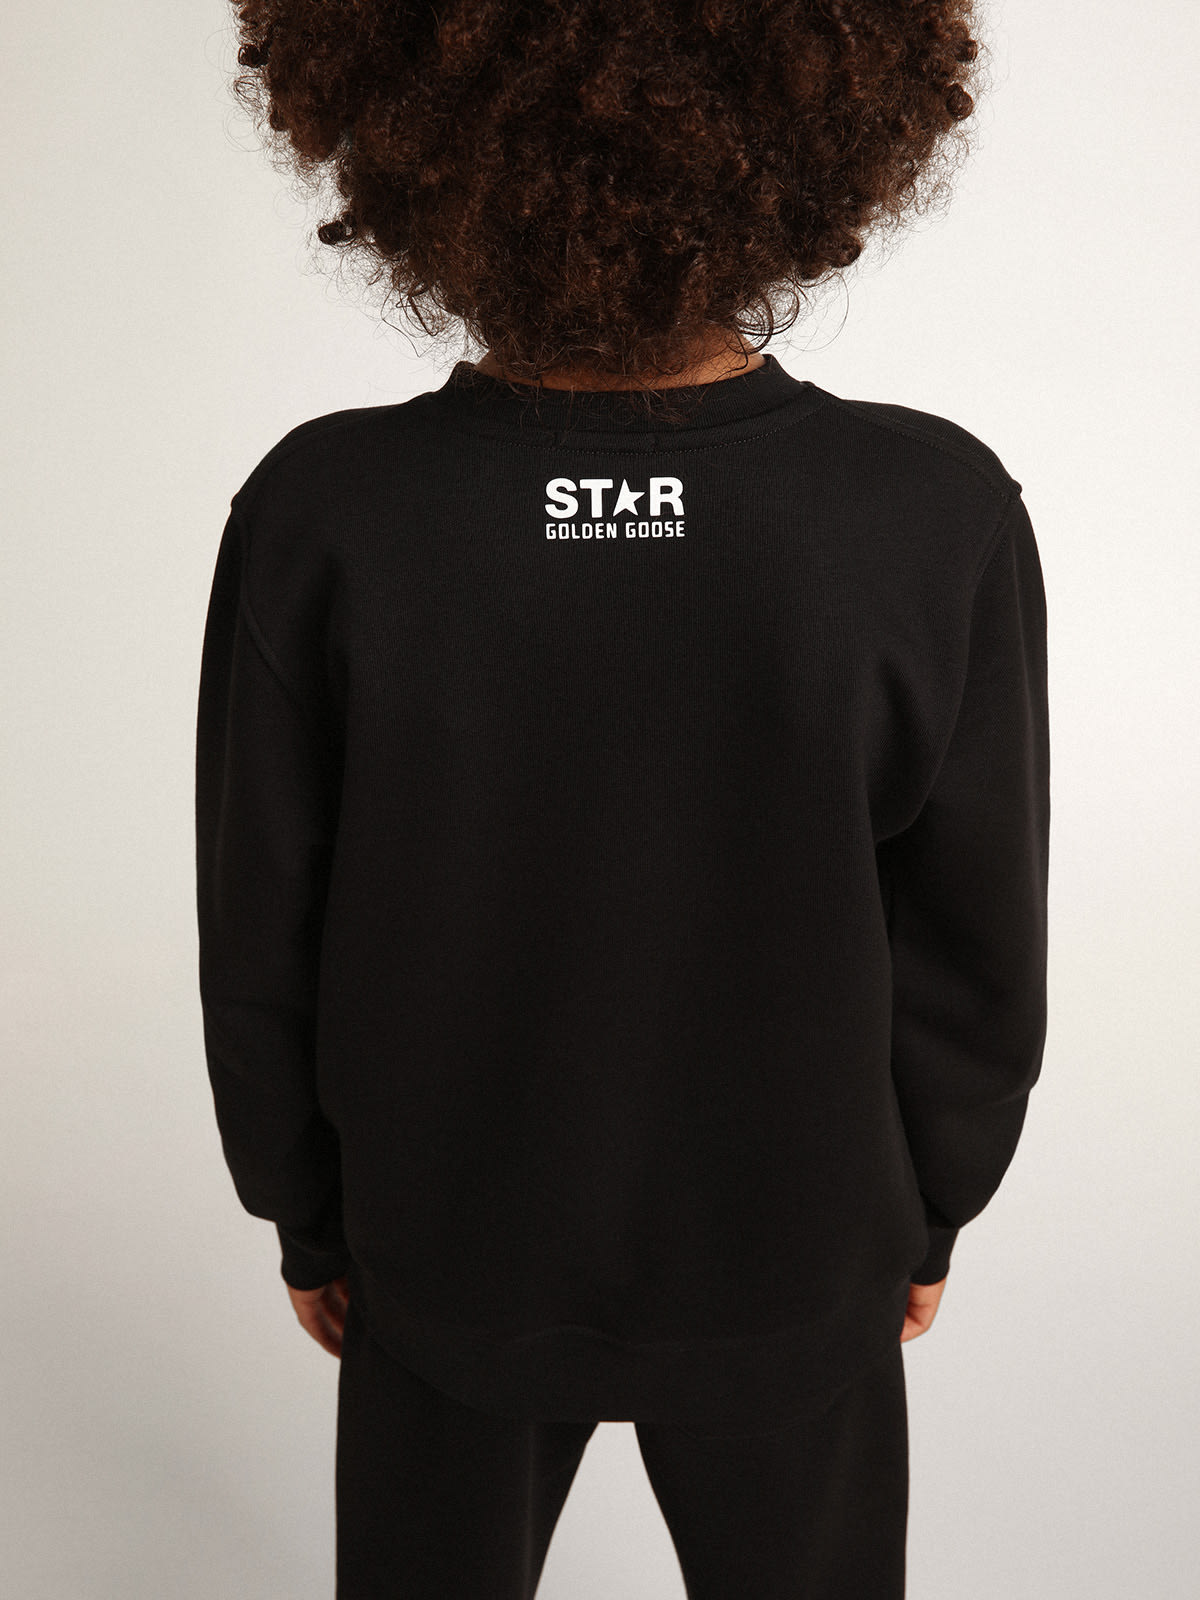 Golden Goose - Black Star Collection sweatshirt with white maxi star on the front in 